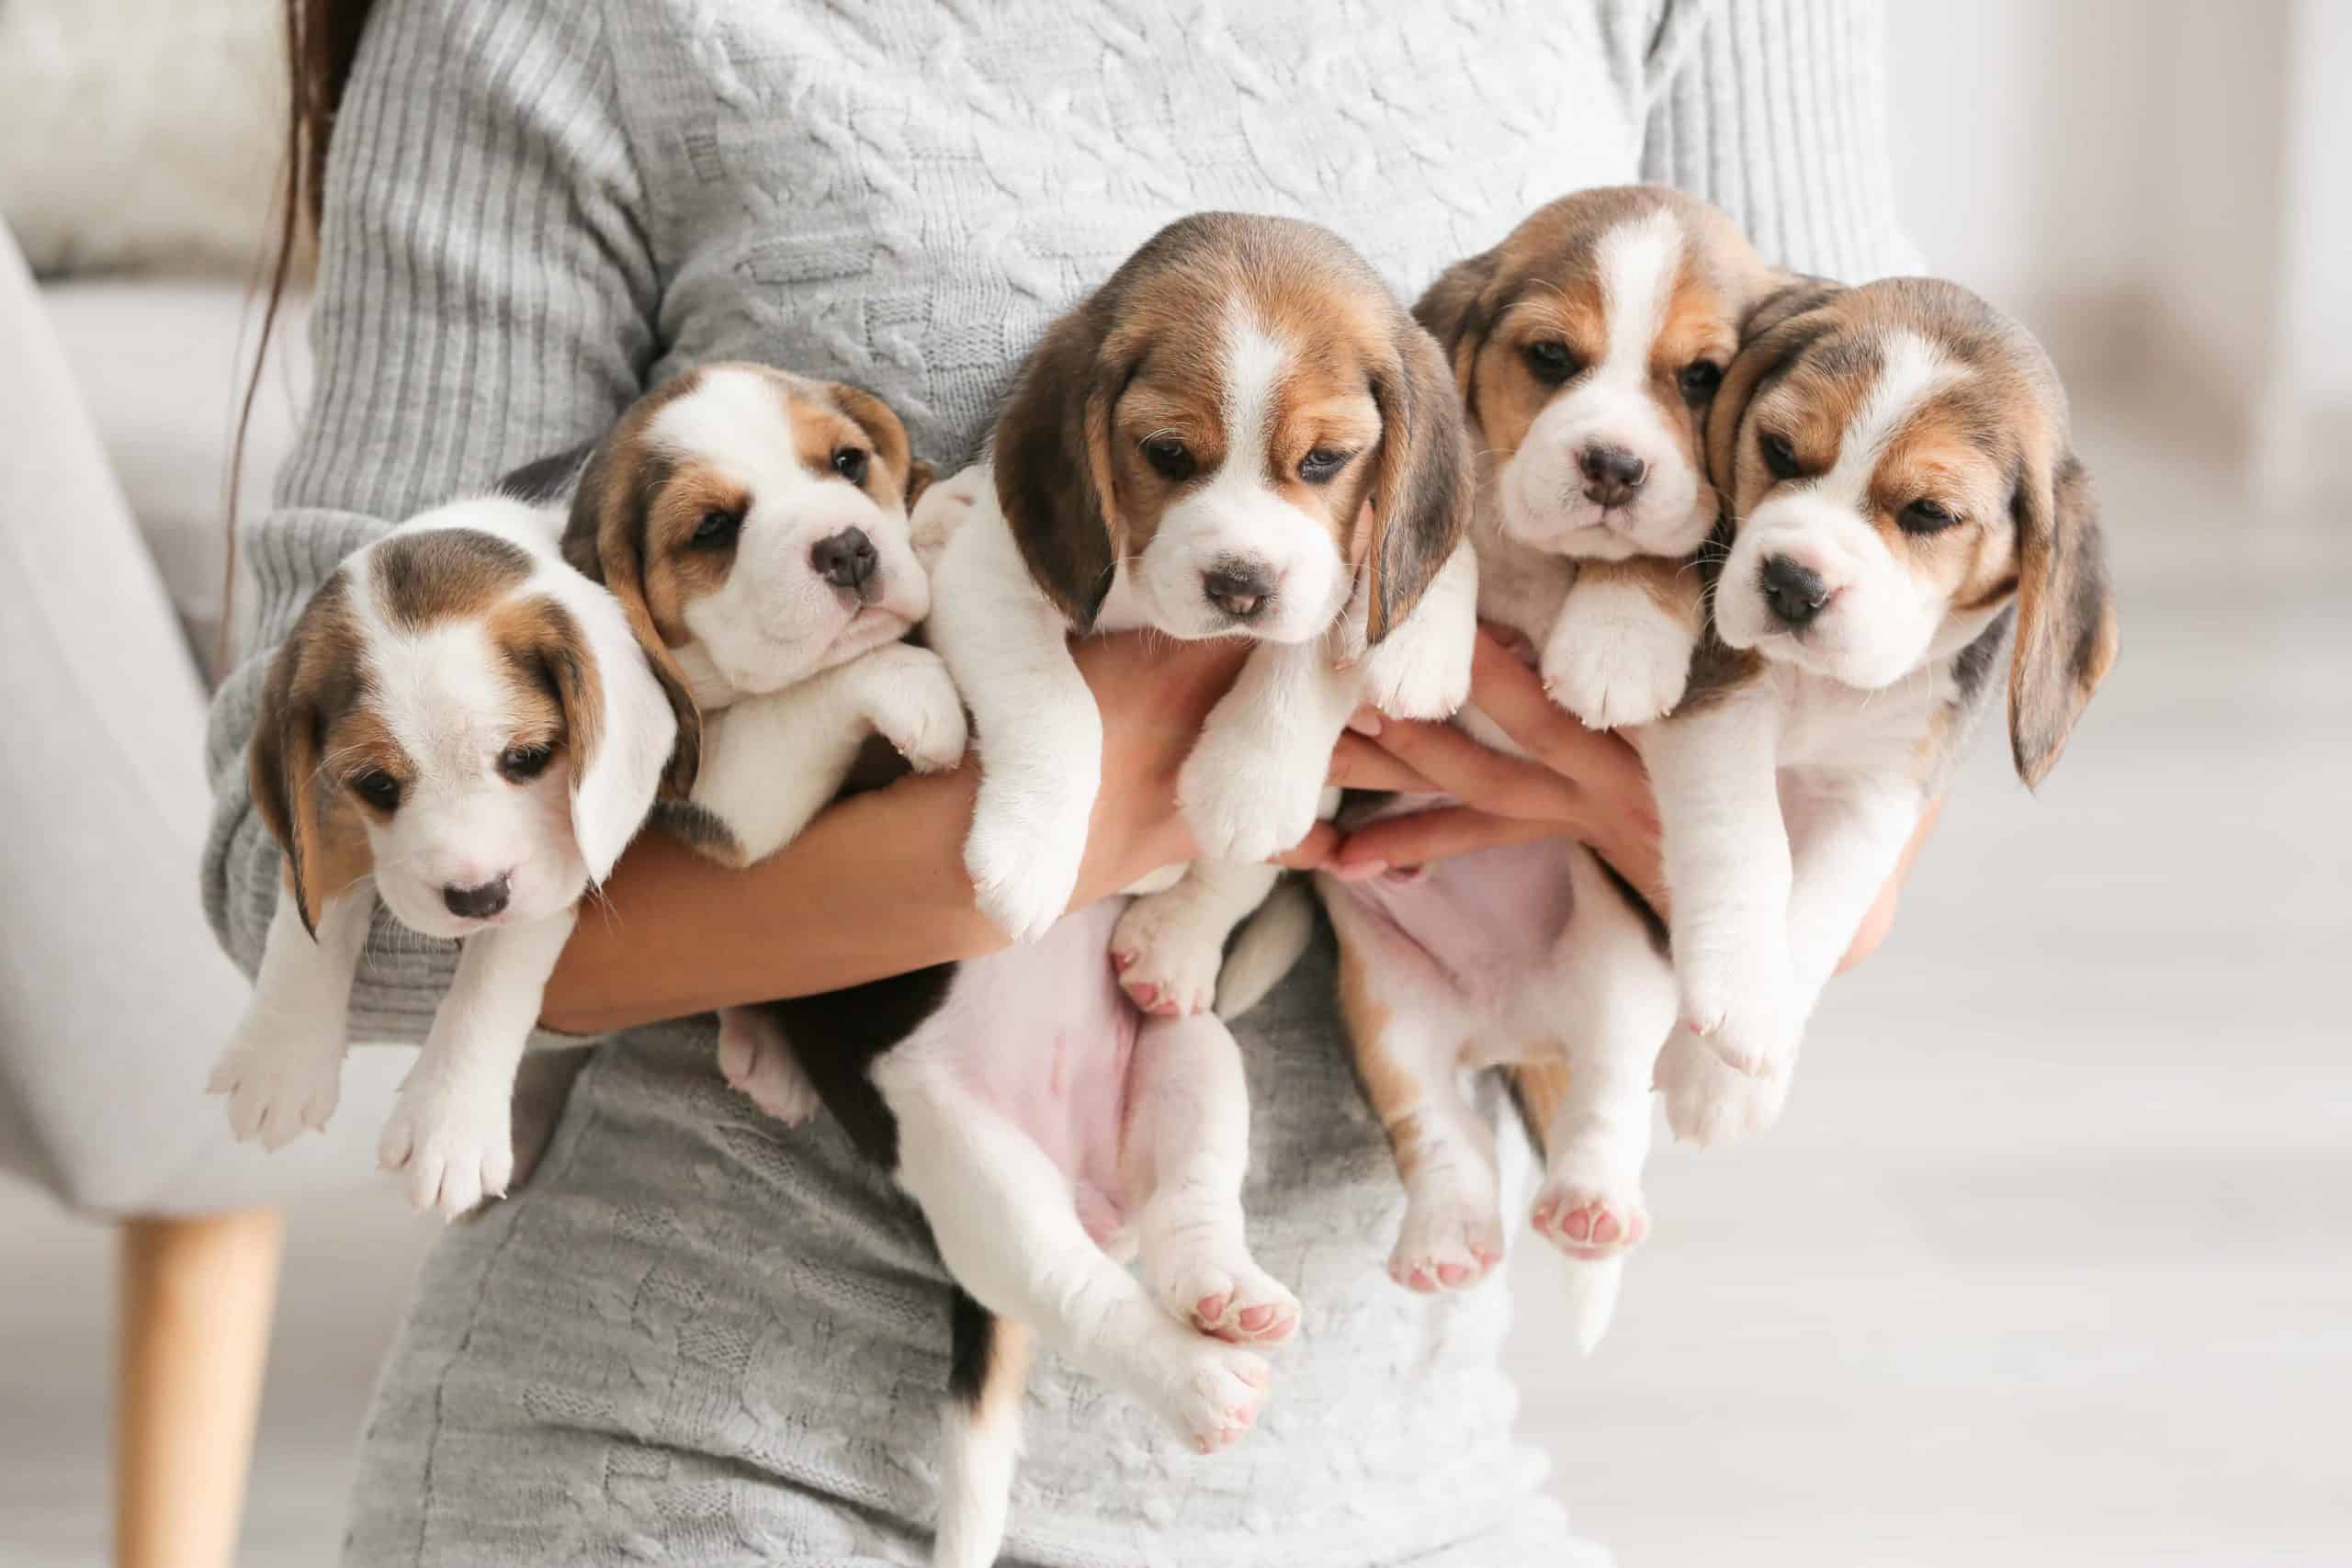 Woman holds litter of beagle puppies. When buying a dog online, do your research, use caution, and only deal with reputable businesses to ensure you aren’t scammed.